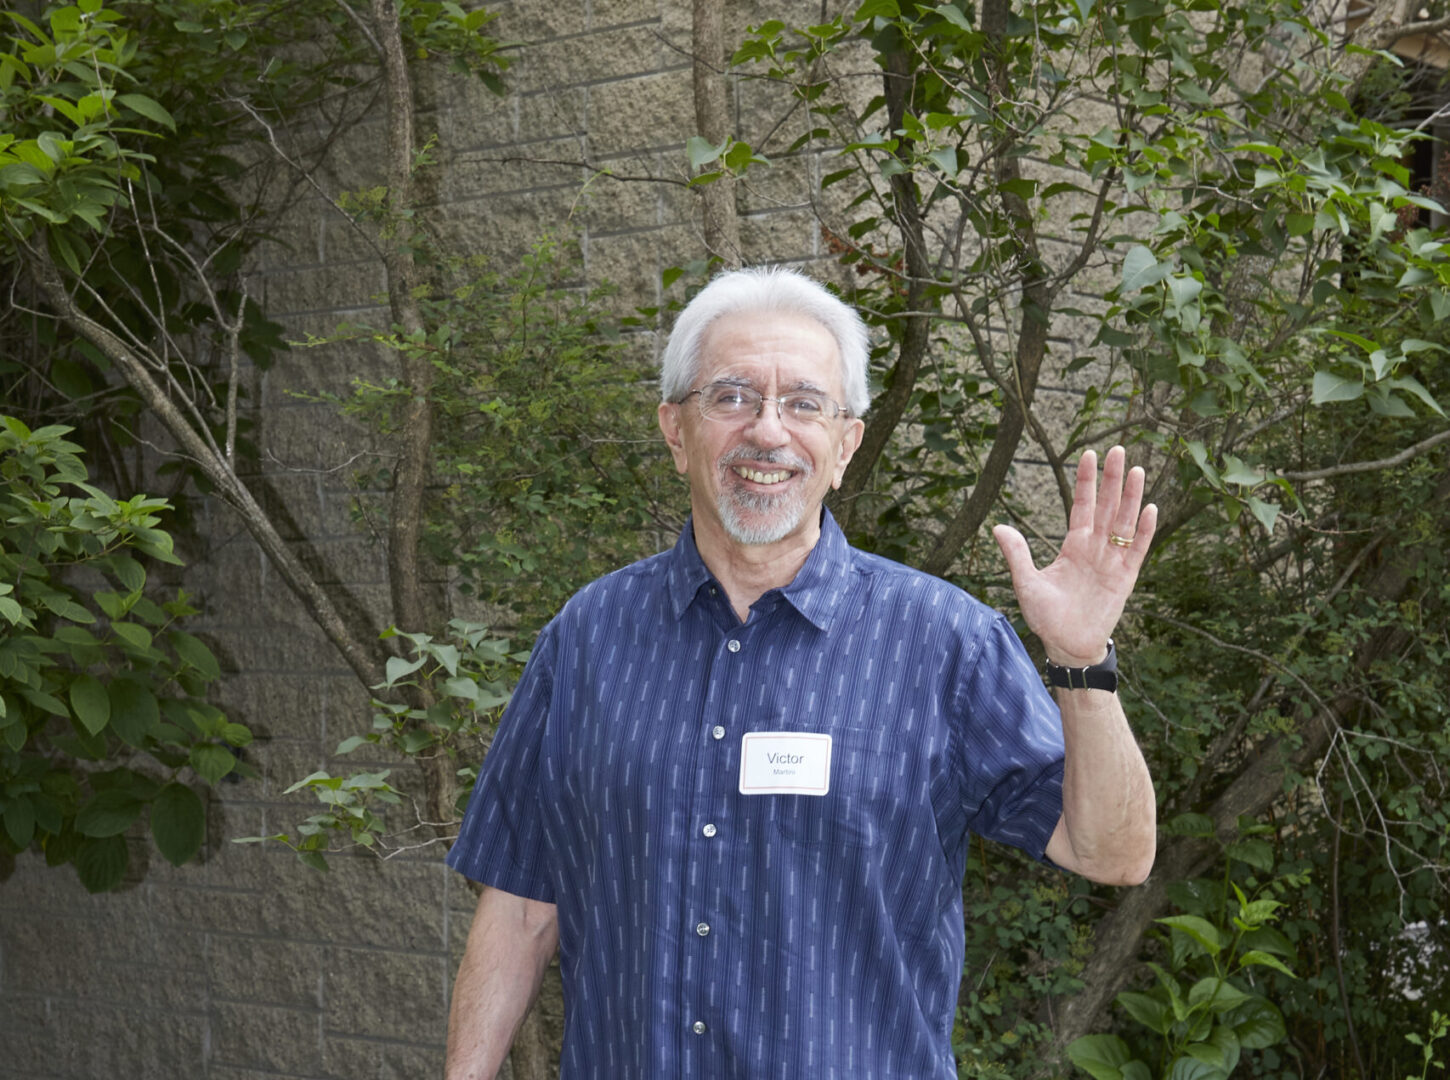 Older man with gray cropped hair standing and waving at the camera with a big bag in hand